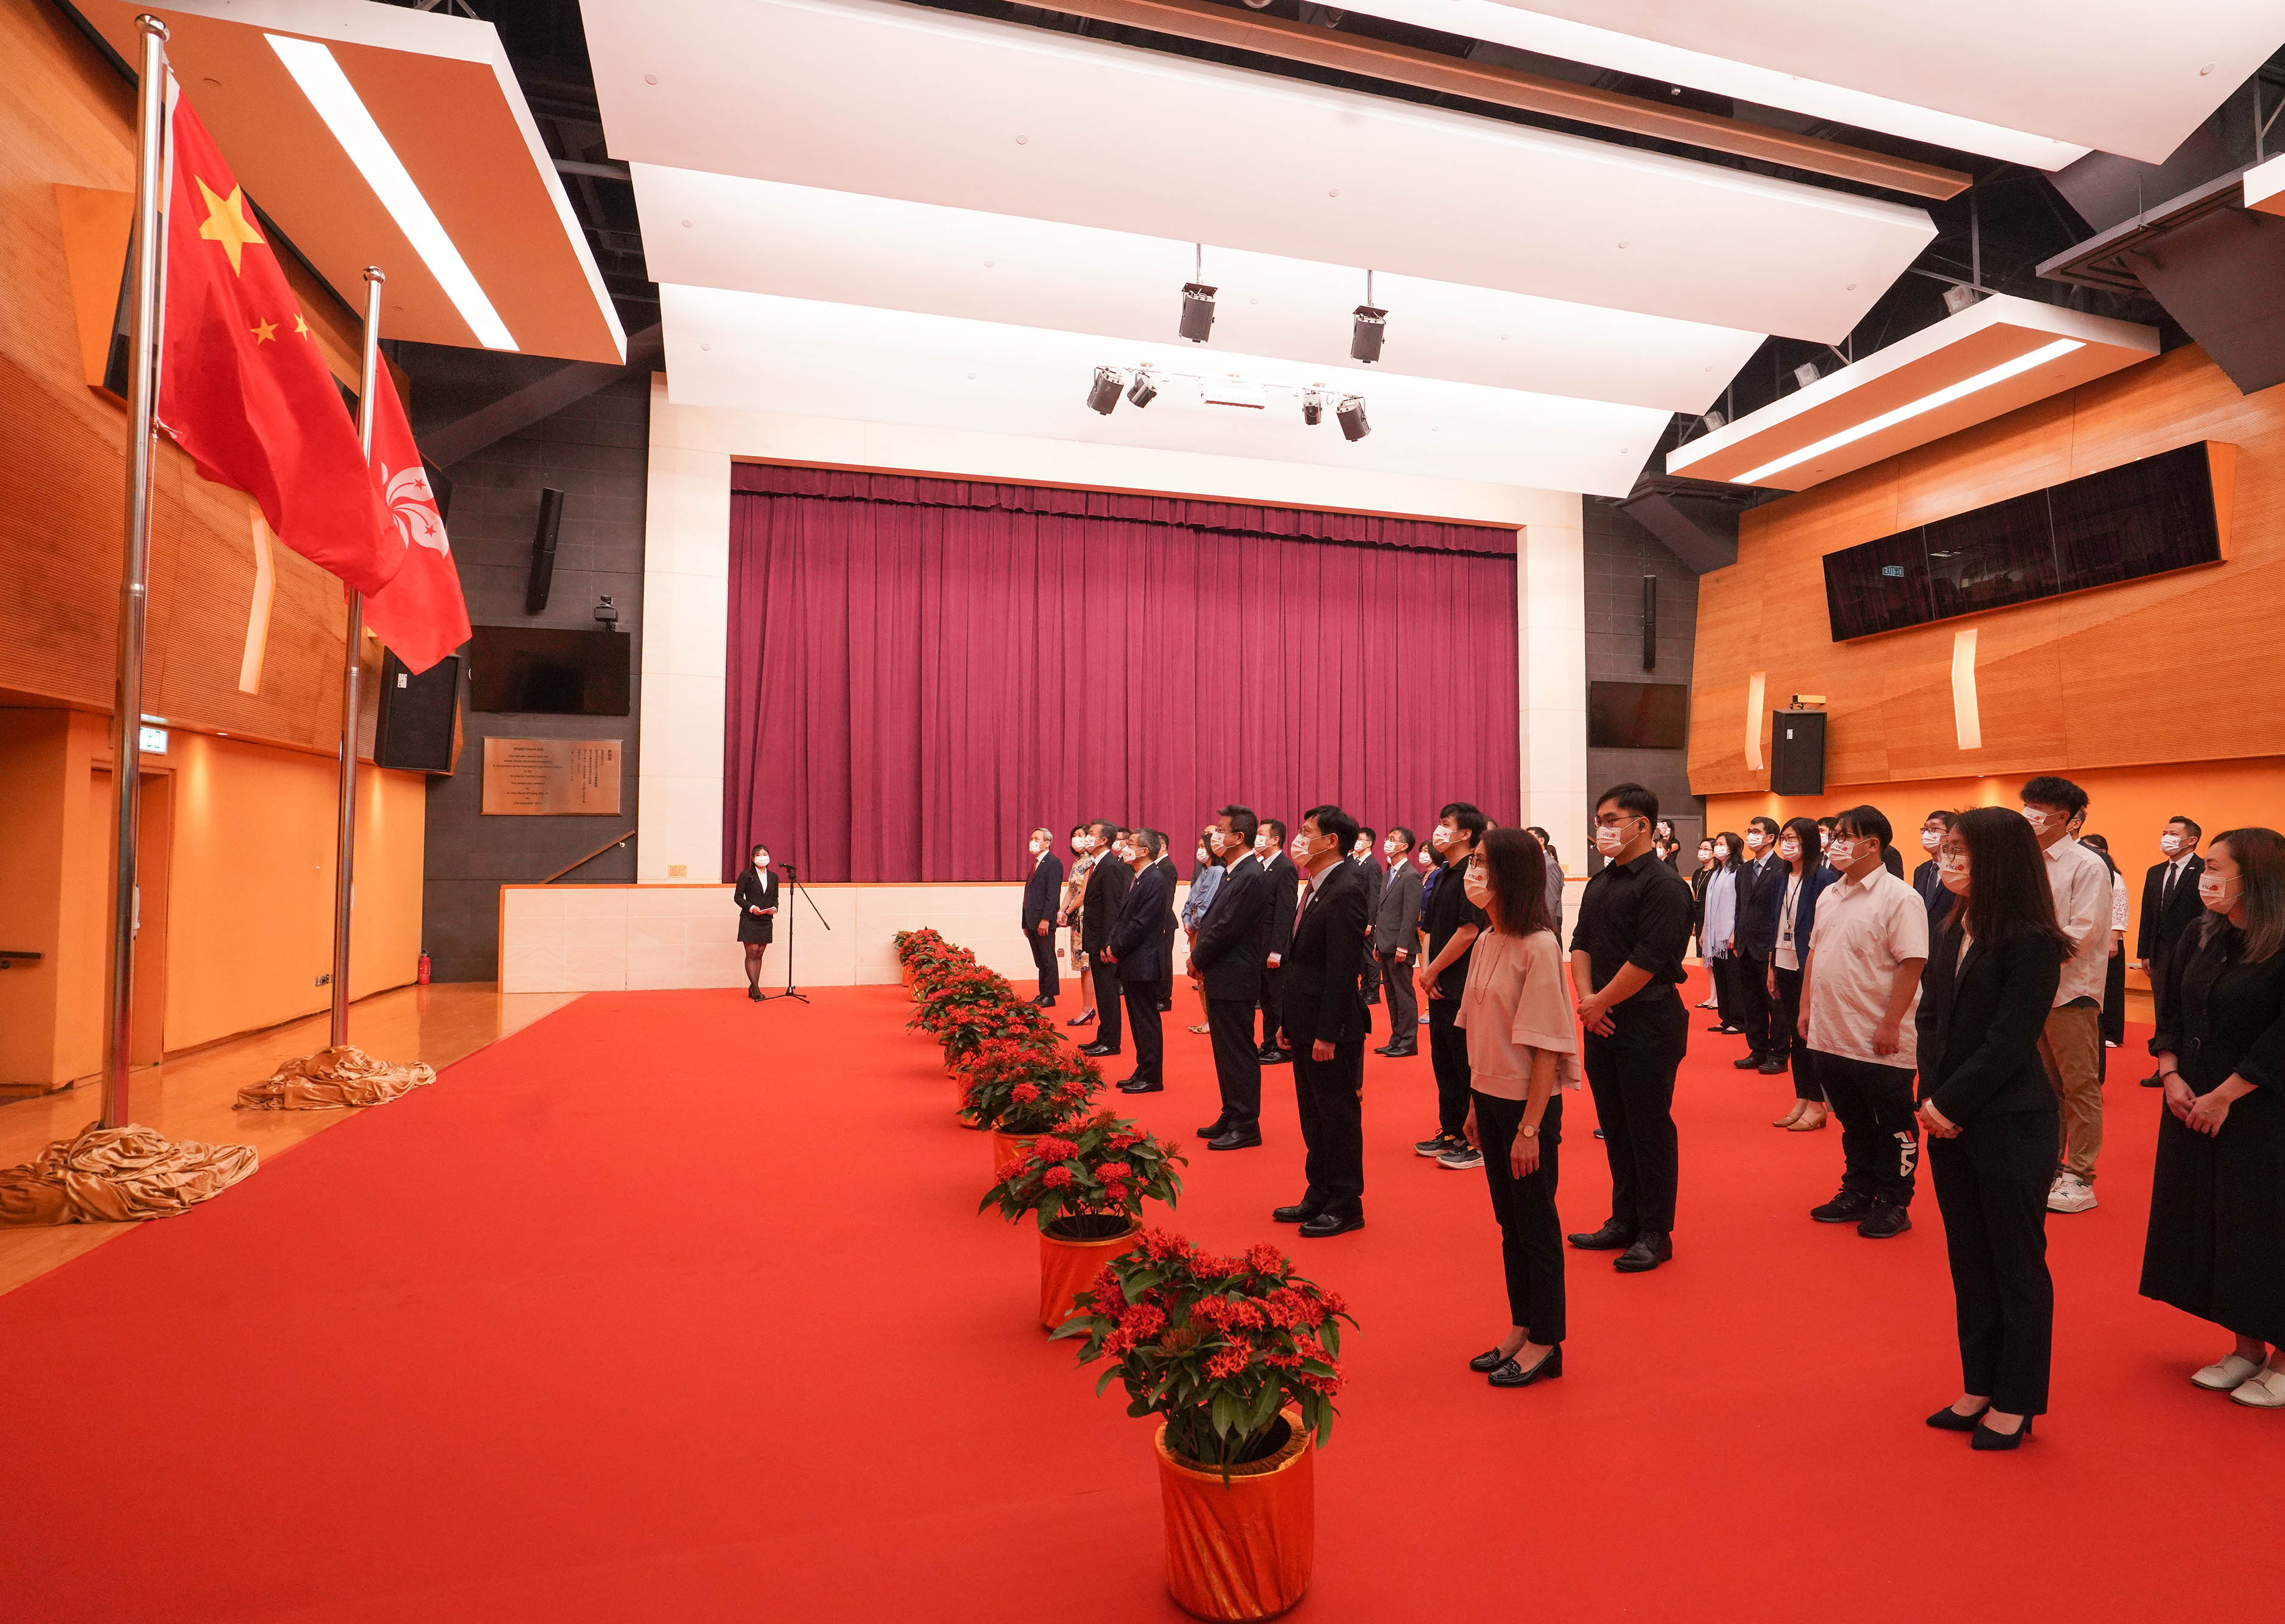 VTC holds flag-raising ceremony in celebration of 
73rd Anniversary of the Founding of the People’s Republic of China